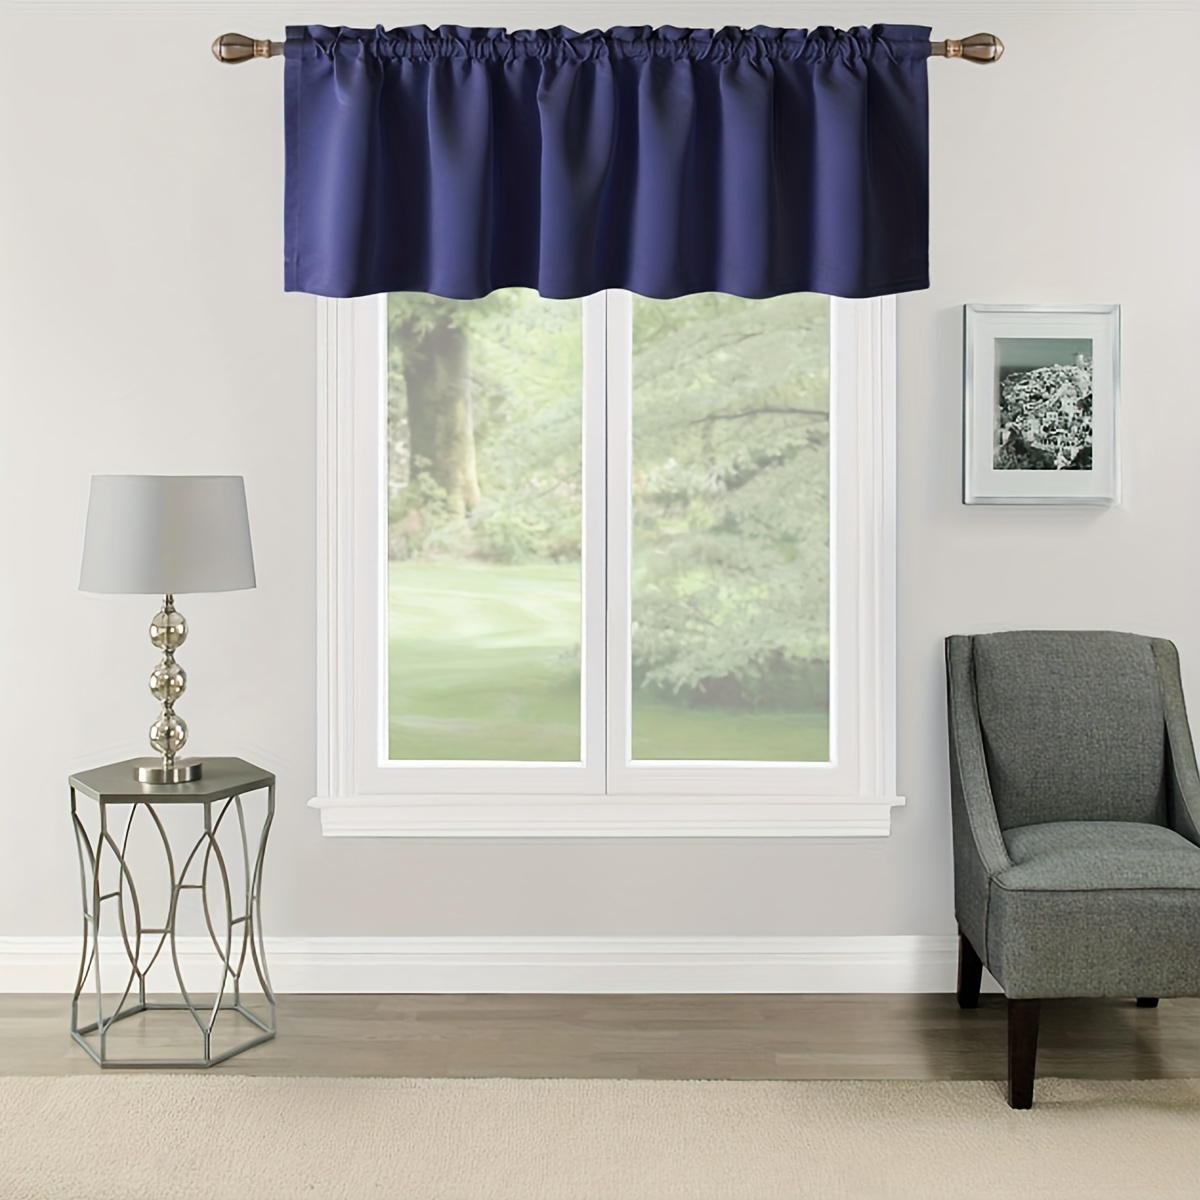 1pc Solid Color Valance Curtain Rod Pocket Window Treatment For Bedroom ...